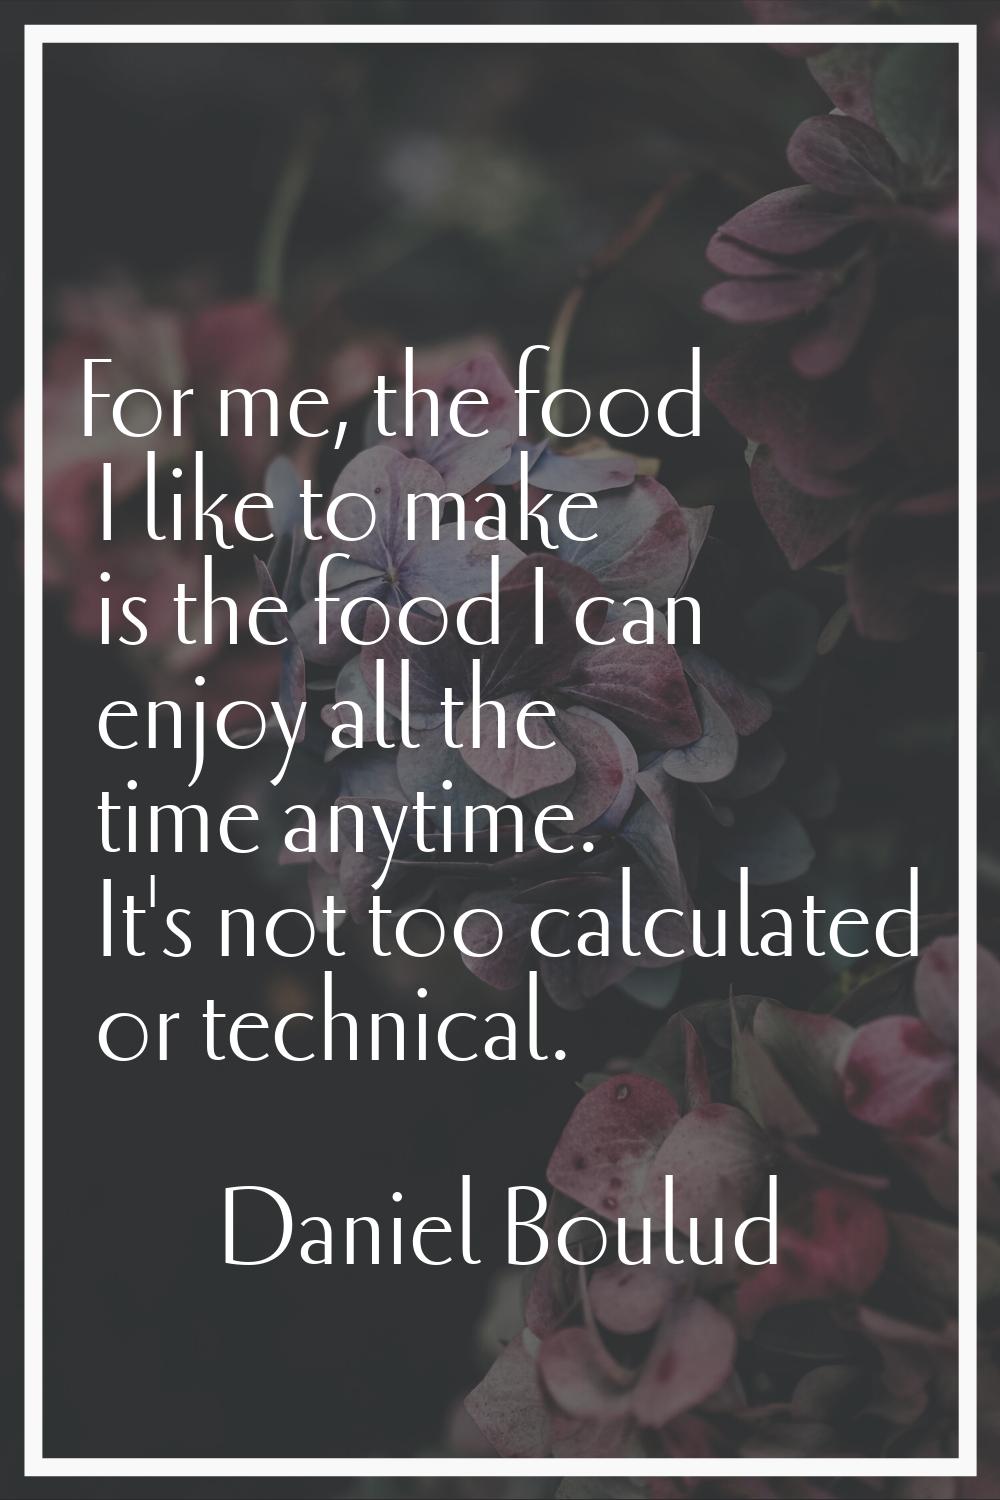 For me, the food I like to make is the food I can enjoy all the time anytime. It's not too calculat